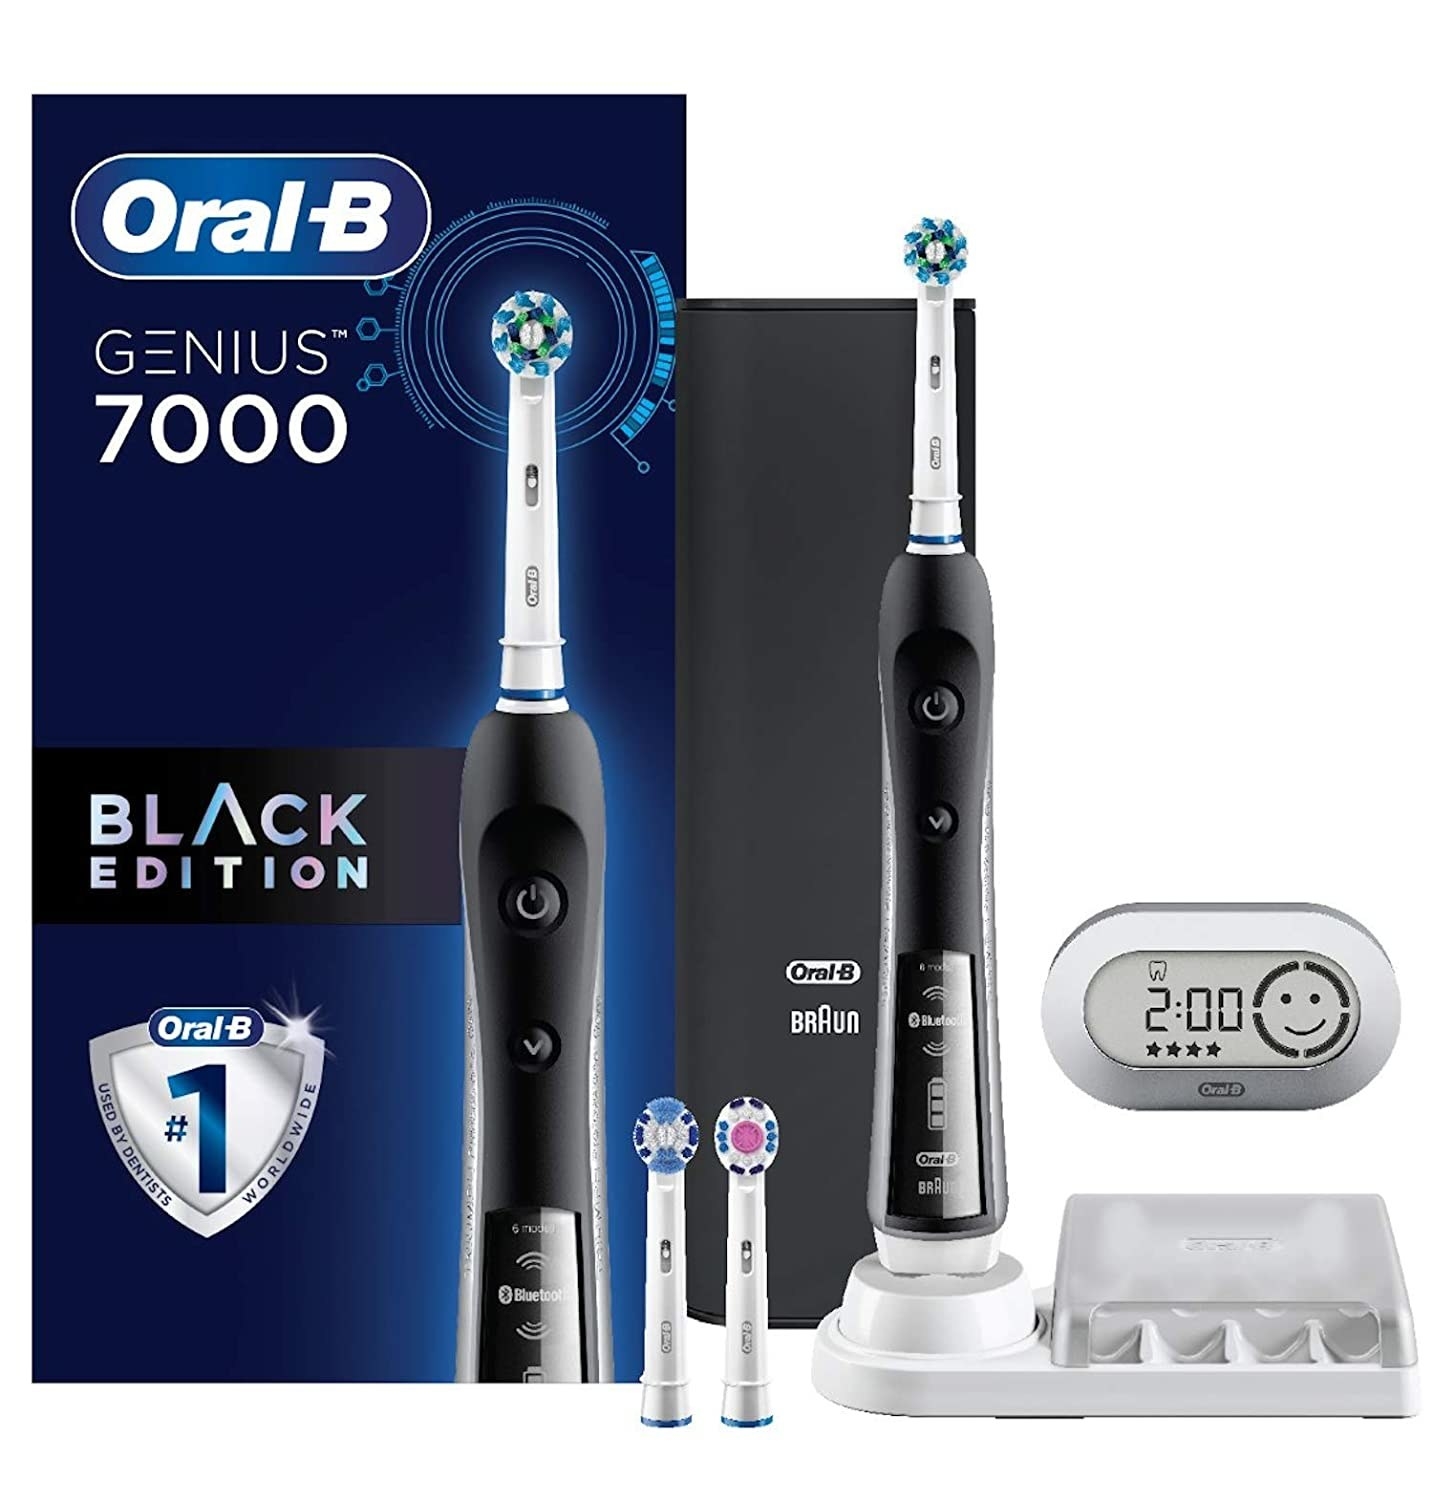 the Oral-B Pro 7000 SmartSeries electric toothbrush set